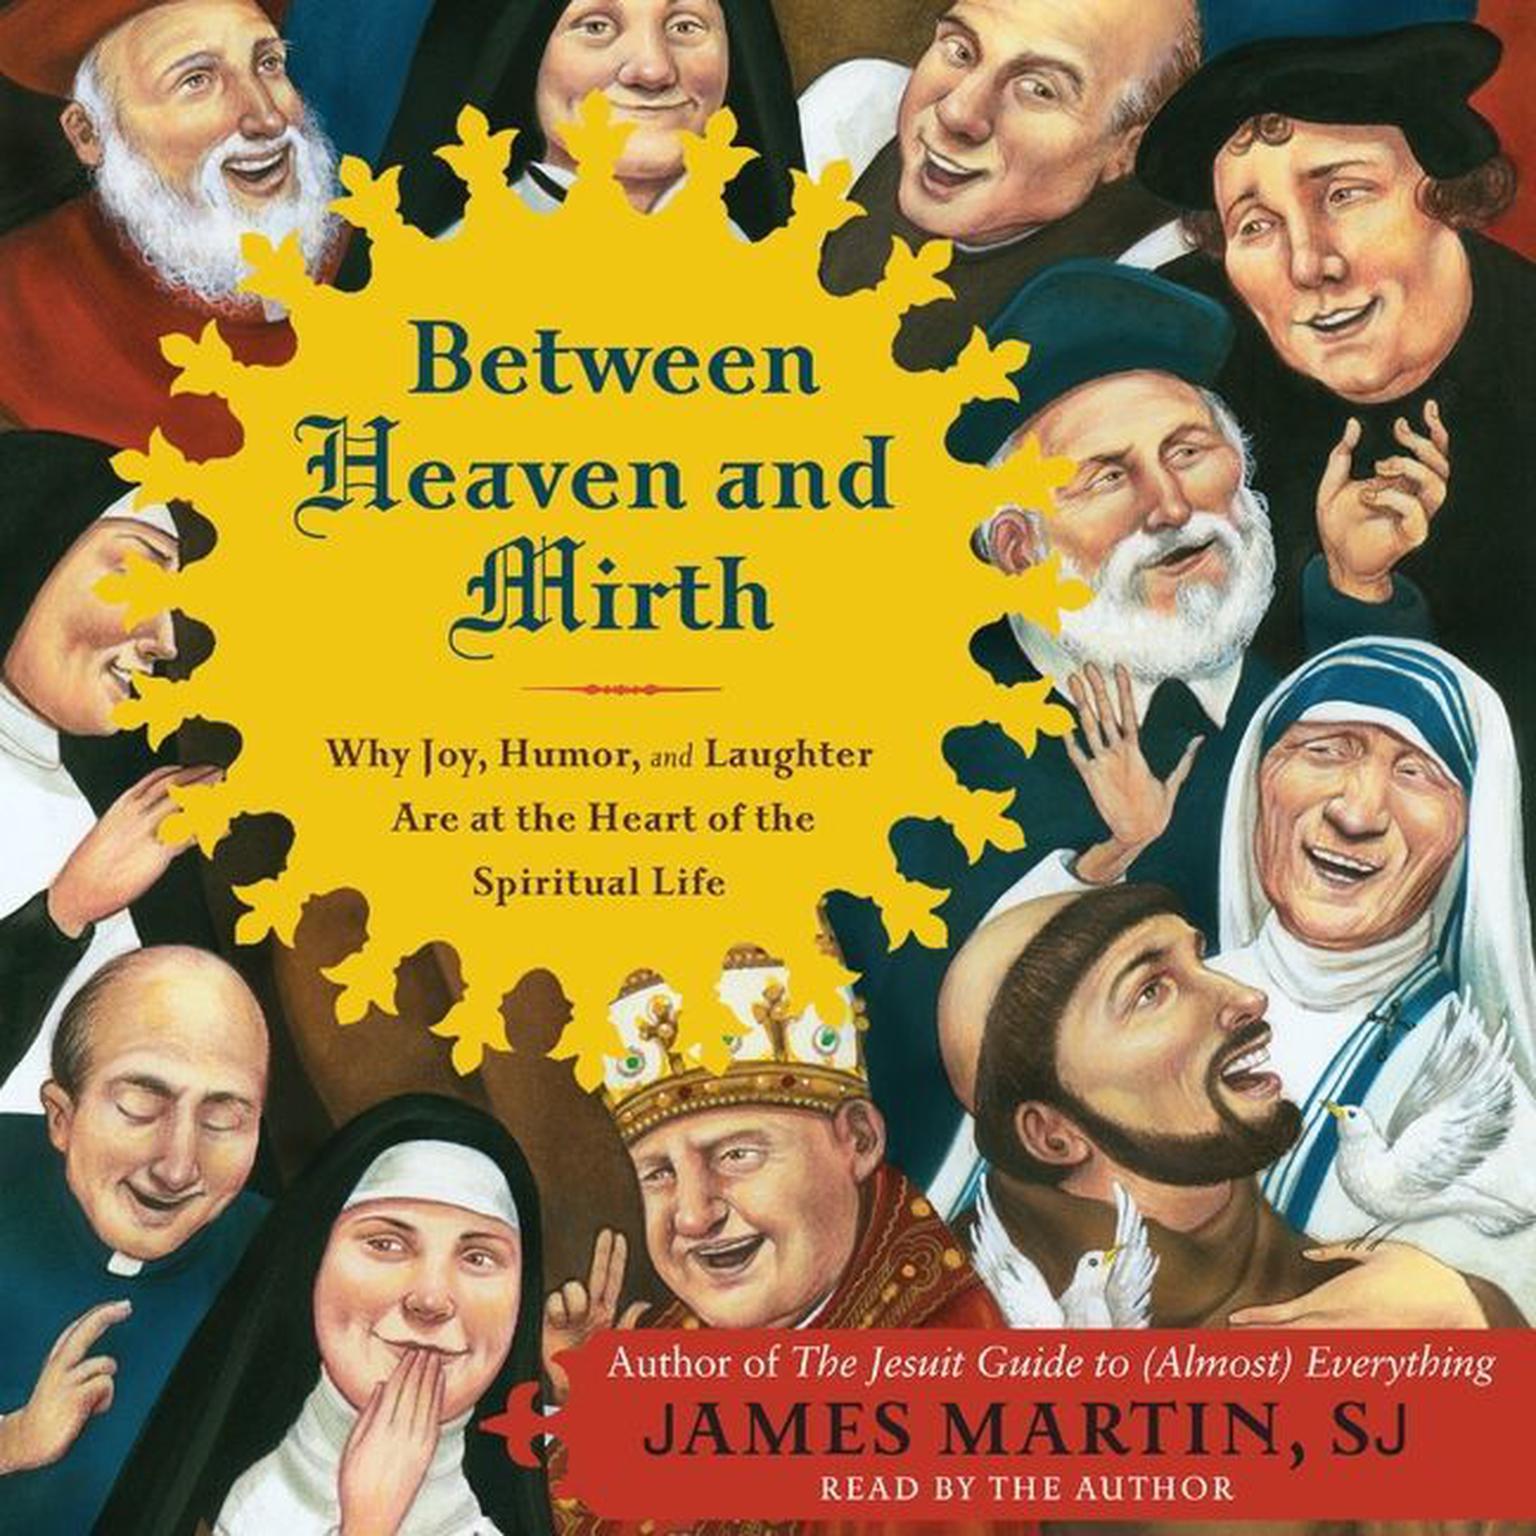 Between Heaven and Mirth: Why Joy, Humor, and Laughter Are at the Heart of the Spiritual Life Audiobook, by James Martin